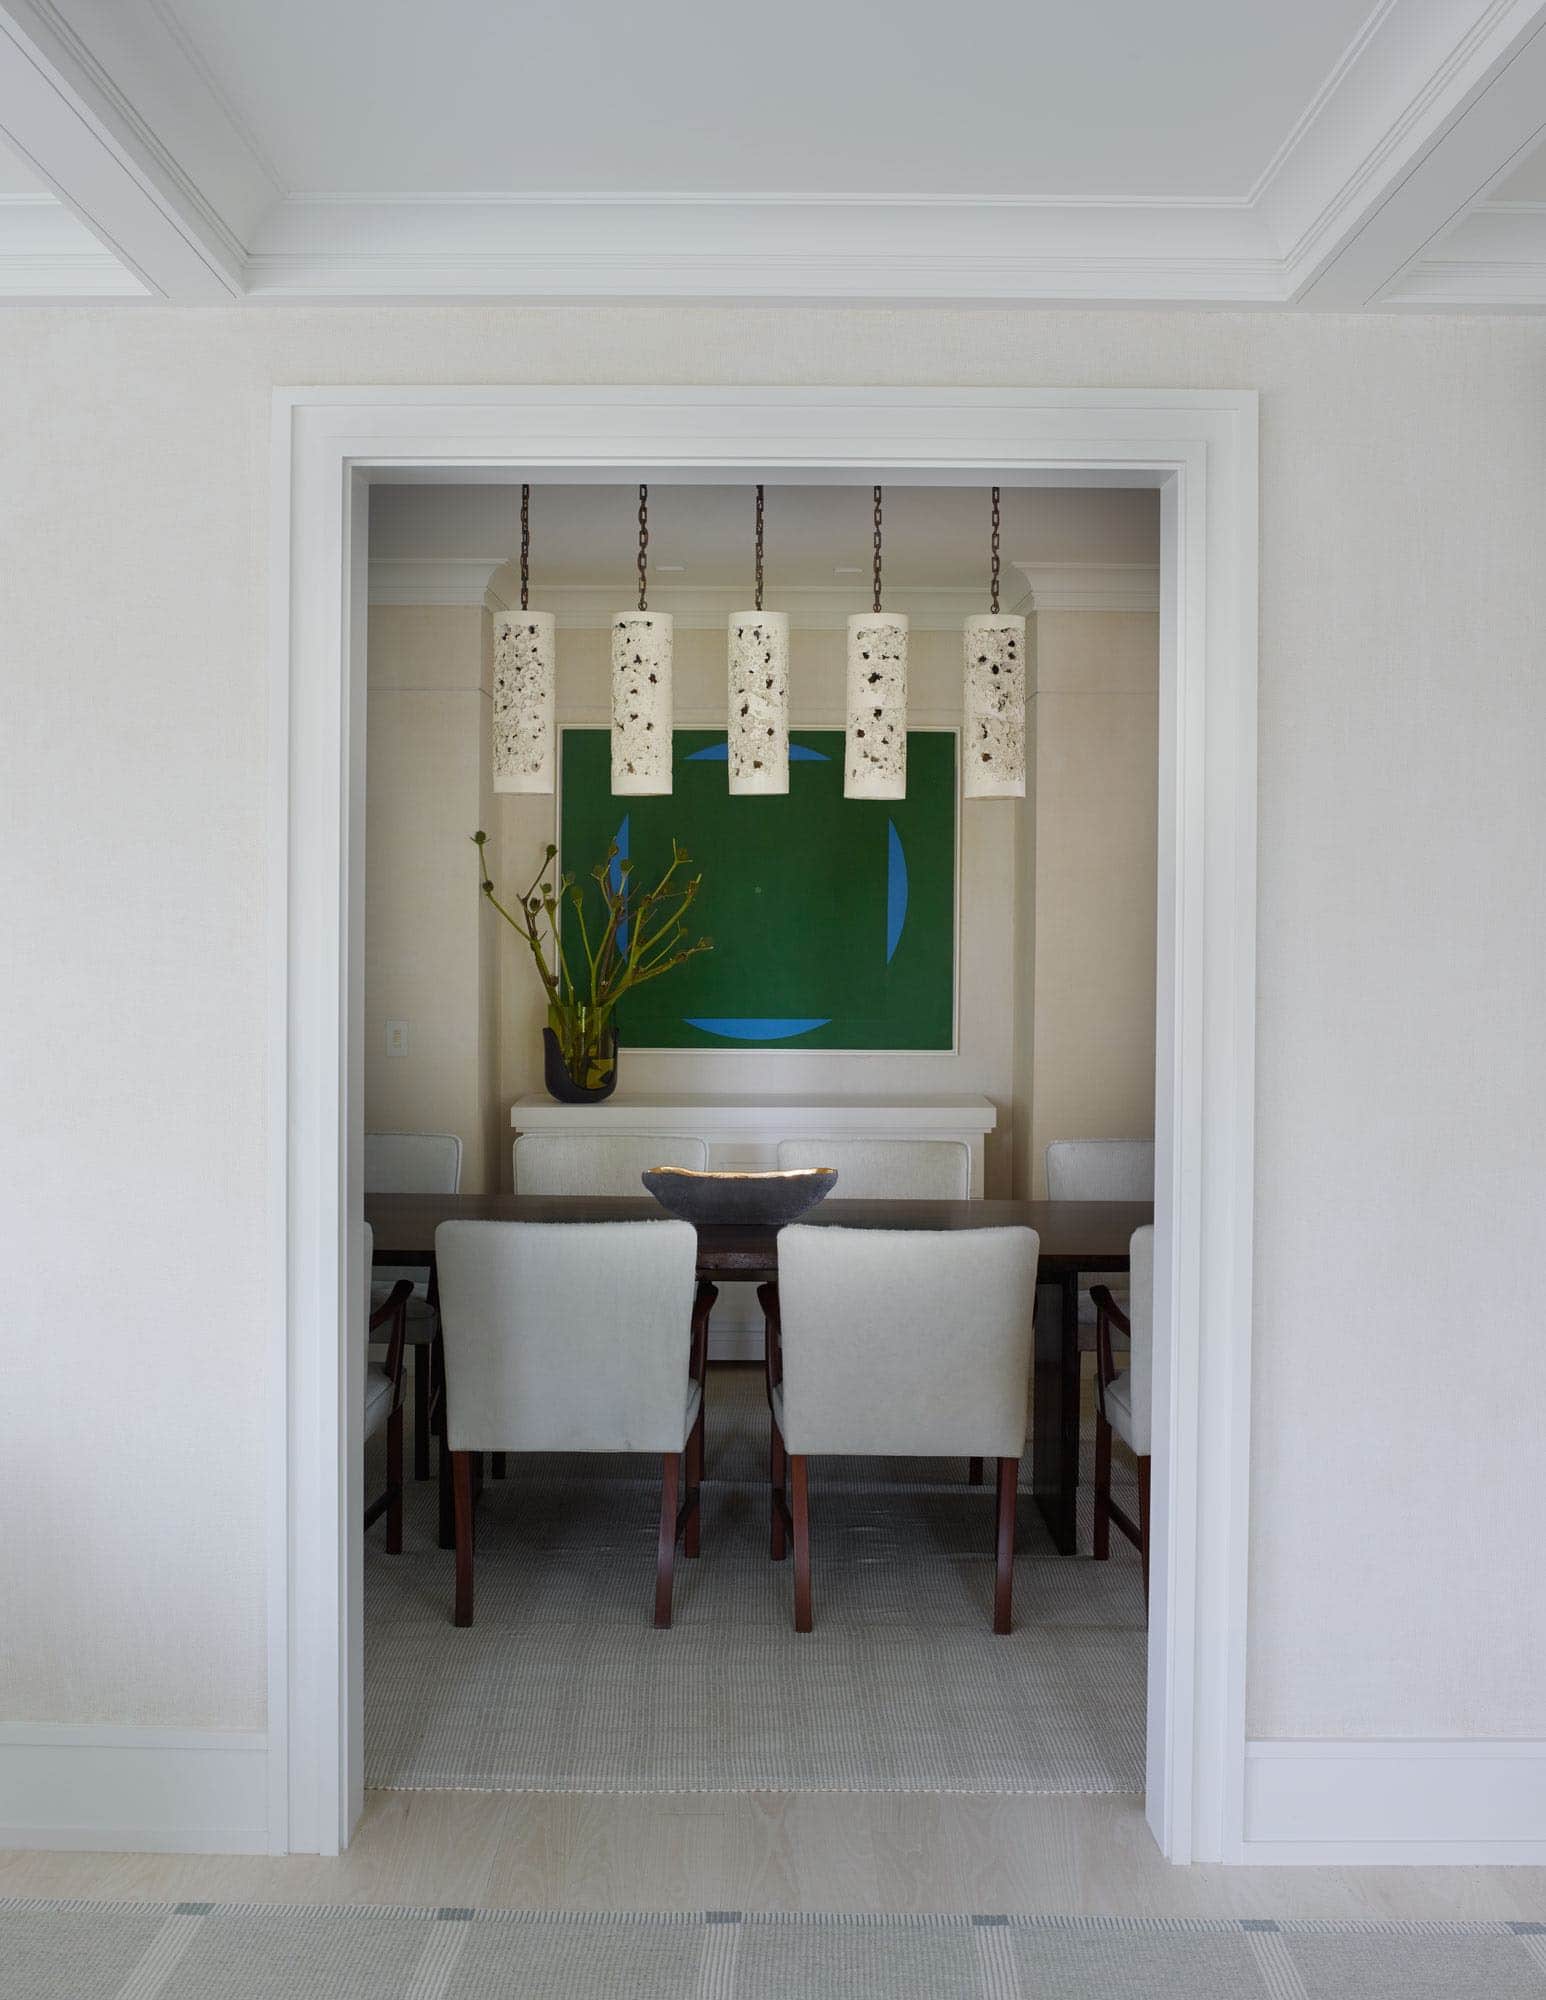 This image shows a dining room designed by Carol Egan with artwork by Jorge Fick and Garden Grid area rug by Elizabeth Eakins.  There are 5 Vintage cylindrical pendant lights in porous pottery hanging above the Japanese wooden dining table by Tucker Robbins that is flanked by dining chairs by Ole Wanscher.  There is a paper buffet by Job Smeets with a ceramic and bronze bowl by Cristina Salusti, Combed Gesso wall treatment by Boyd & Reathe and Hill bronze vase by Eric Schmitt.